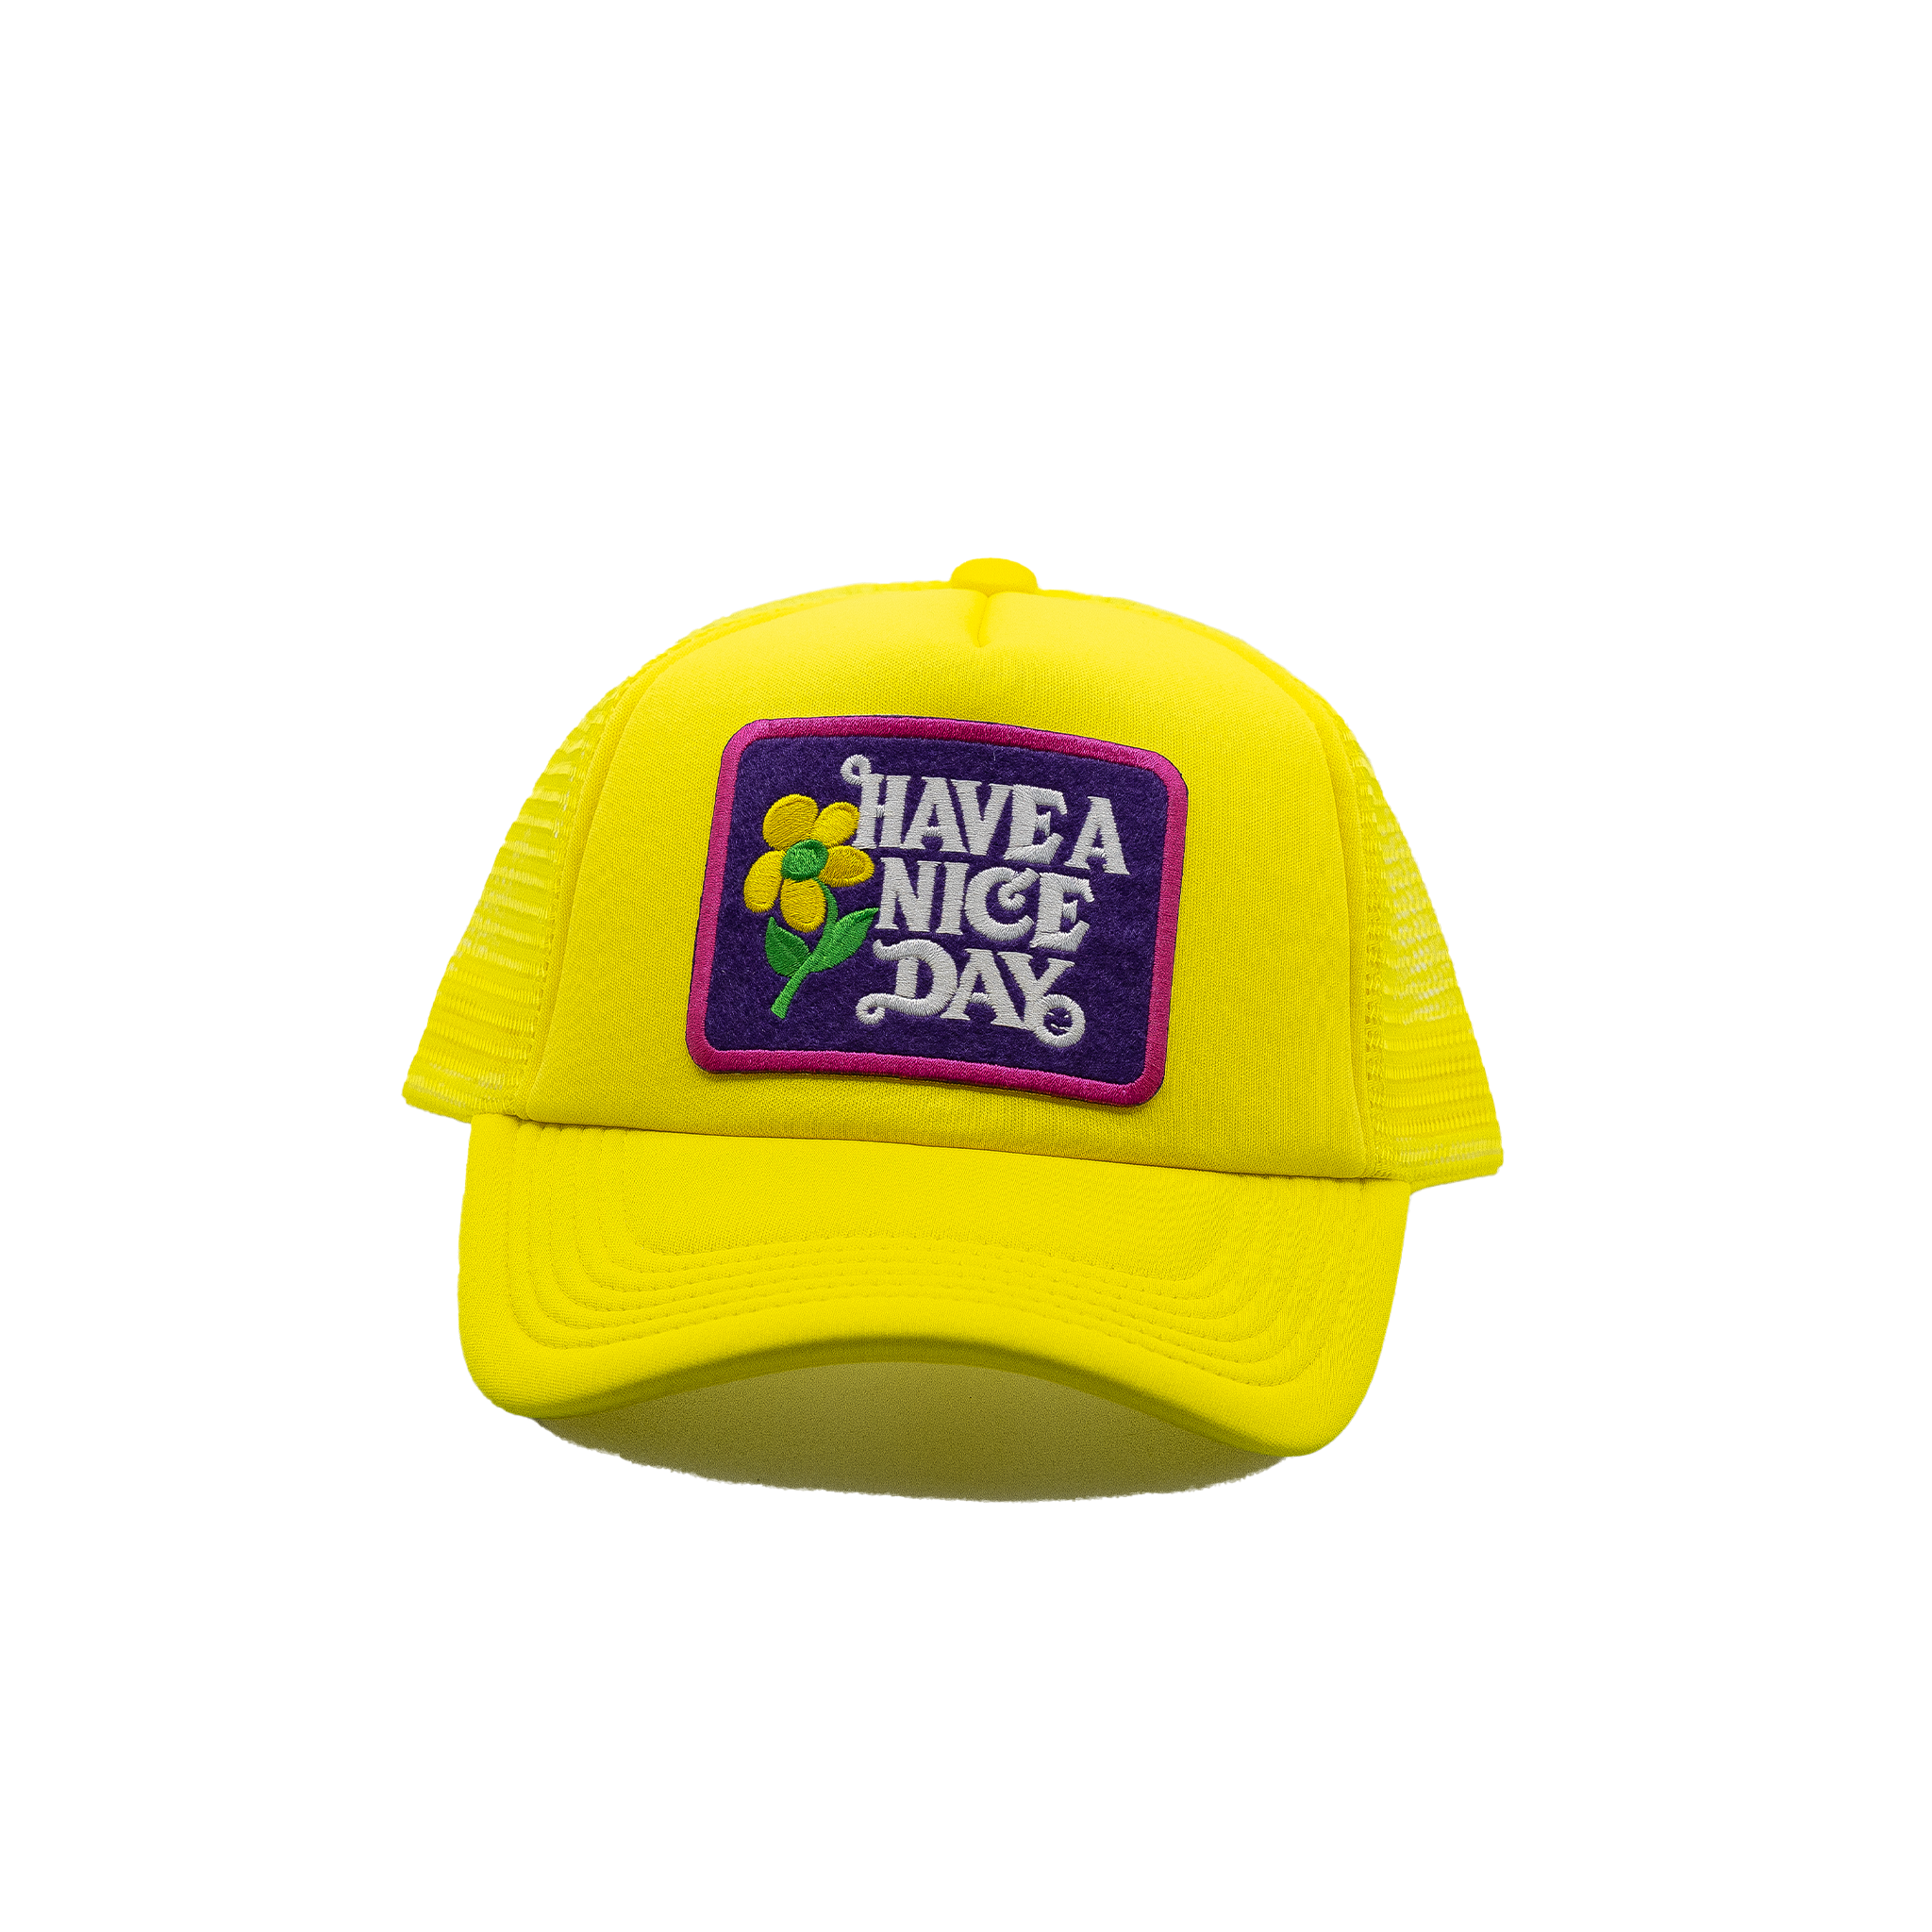 Have a Nice Day Yellow All Styles Trucker Hat